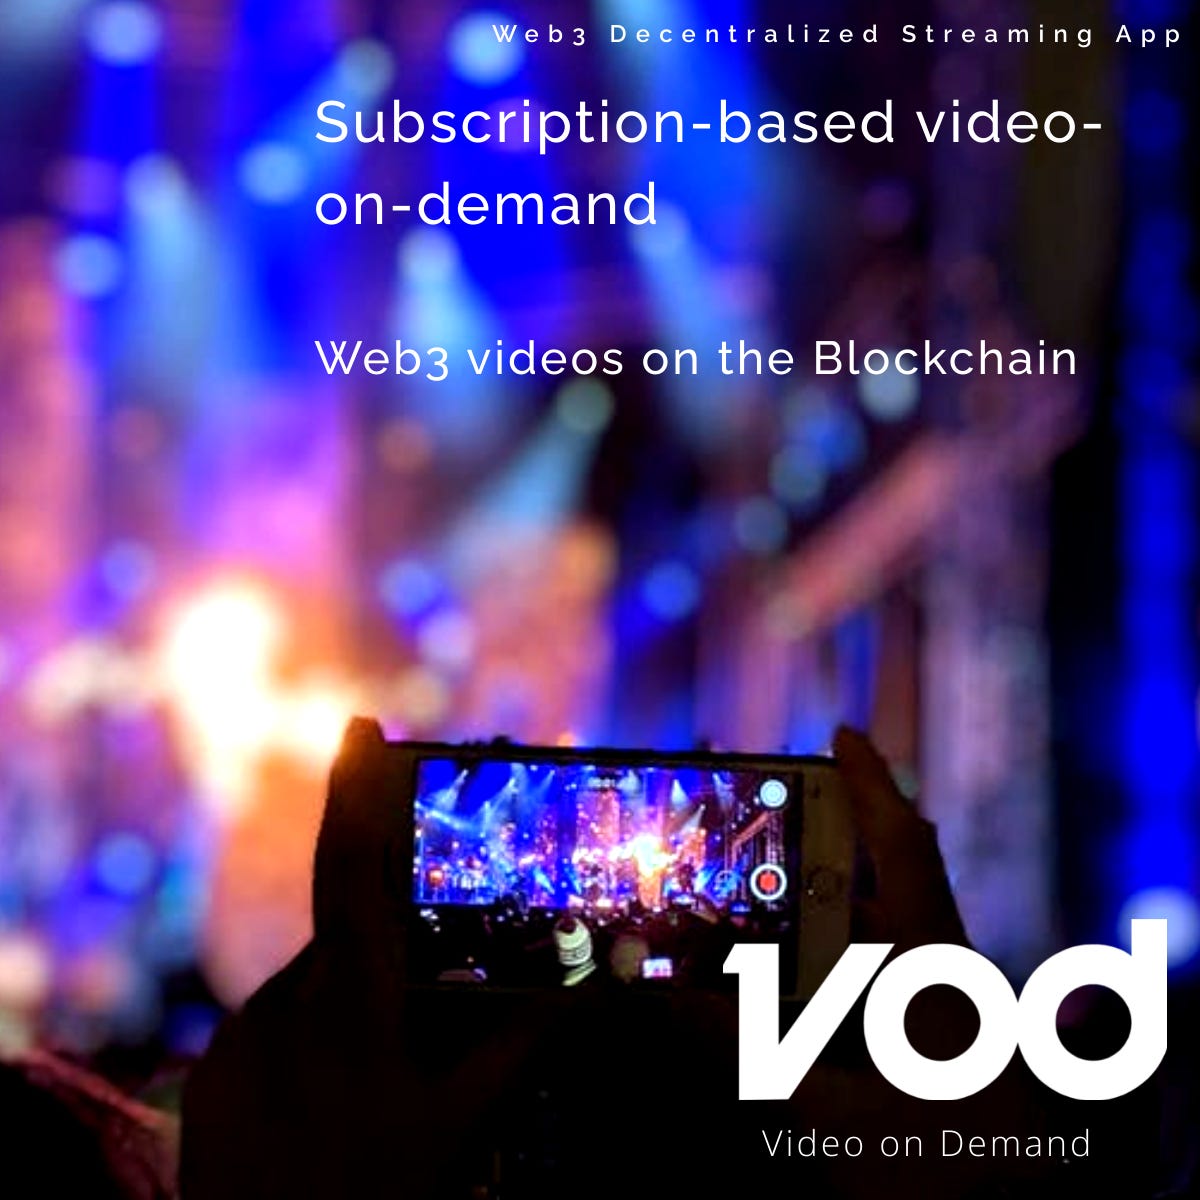 VOD Video on Demand — Web3 Video Streaming App by VodOfficial Medium